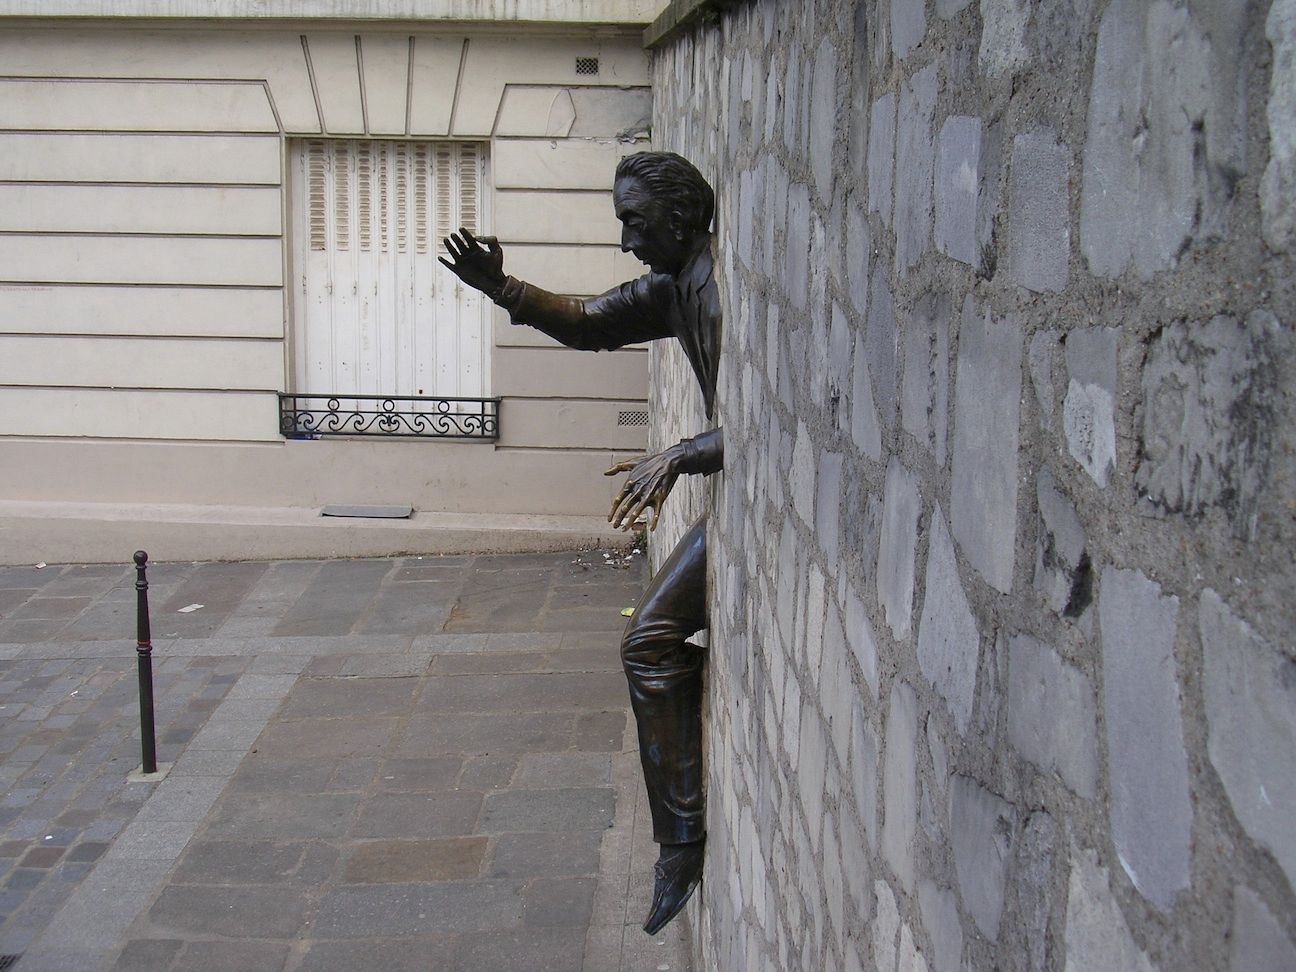 Le Passe-Muraille, Man in Wall